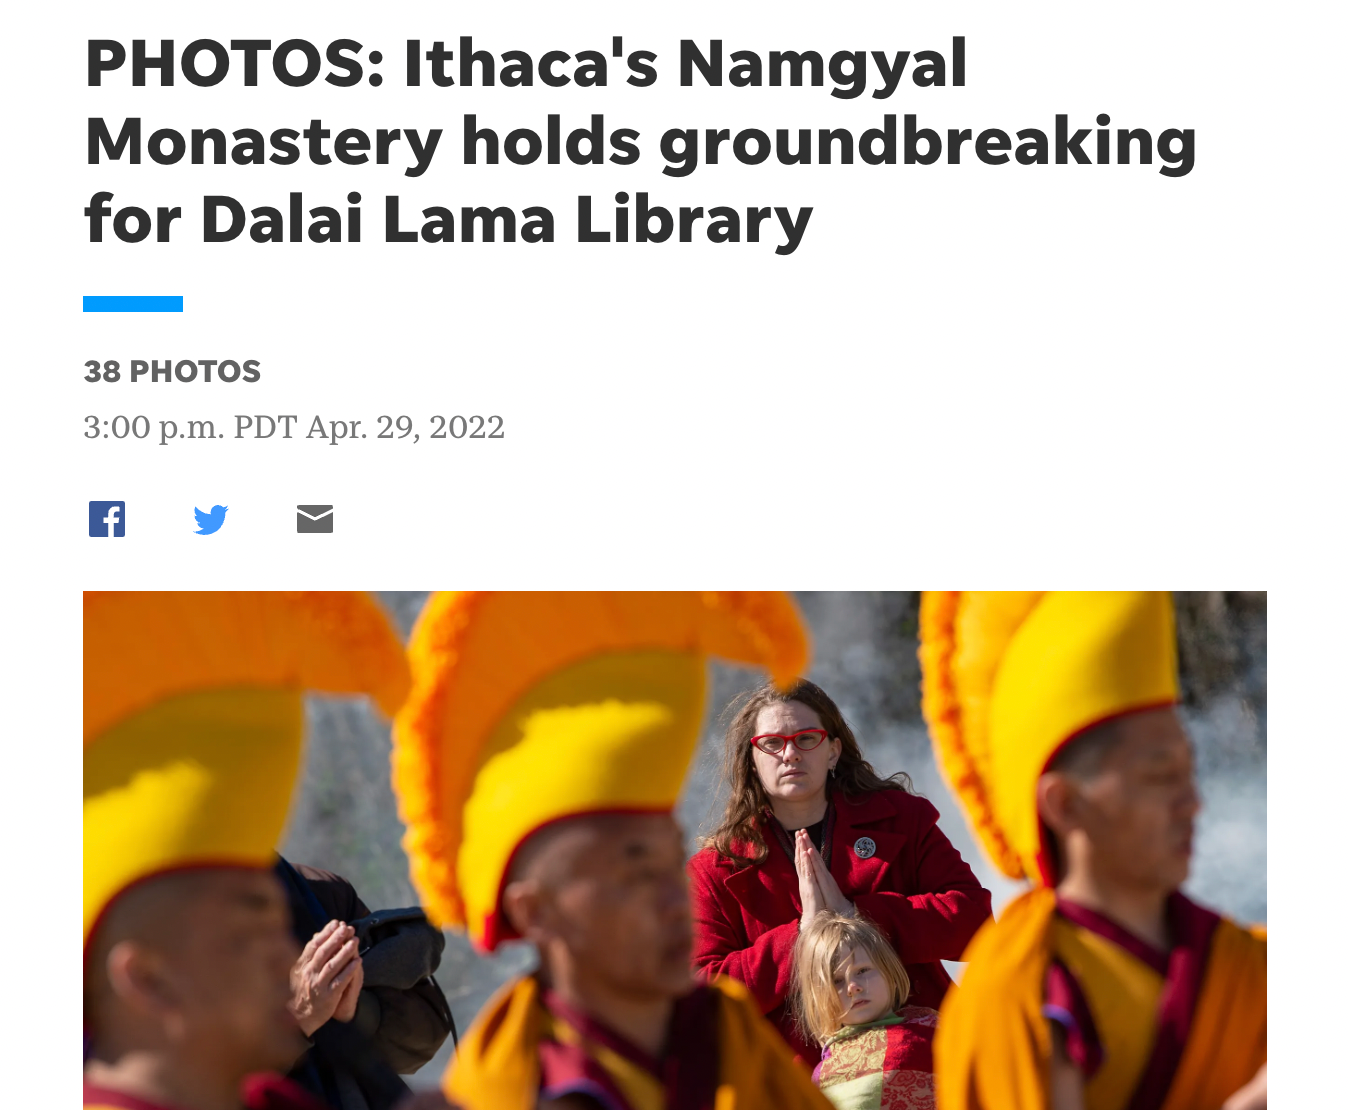 PHOTOS: Ithaca's Namgyal Monastery holds groundbreaking for Dalai Lama Library / ITHACA JOURNAL